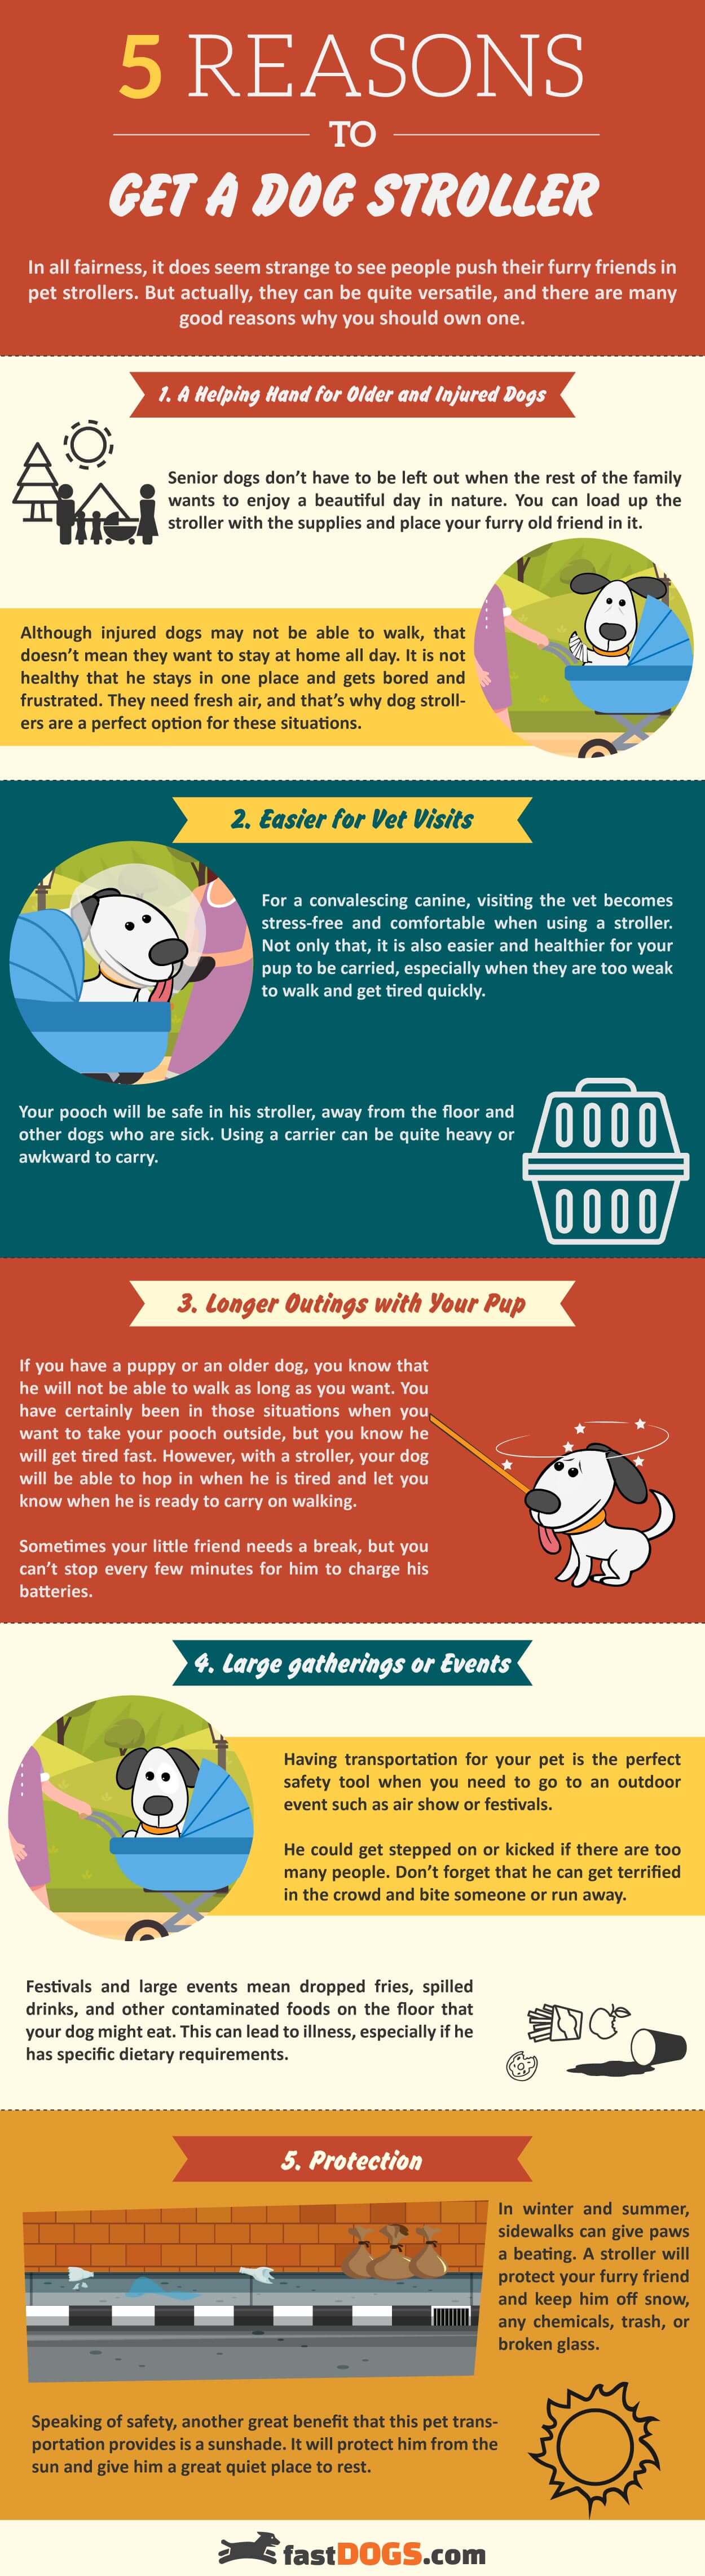 5 Reasons to Get a Dog Stroller